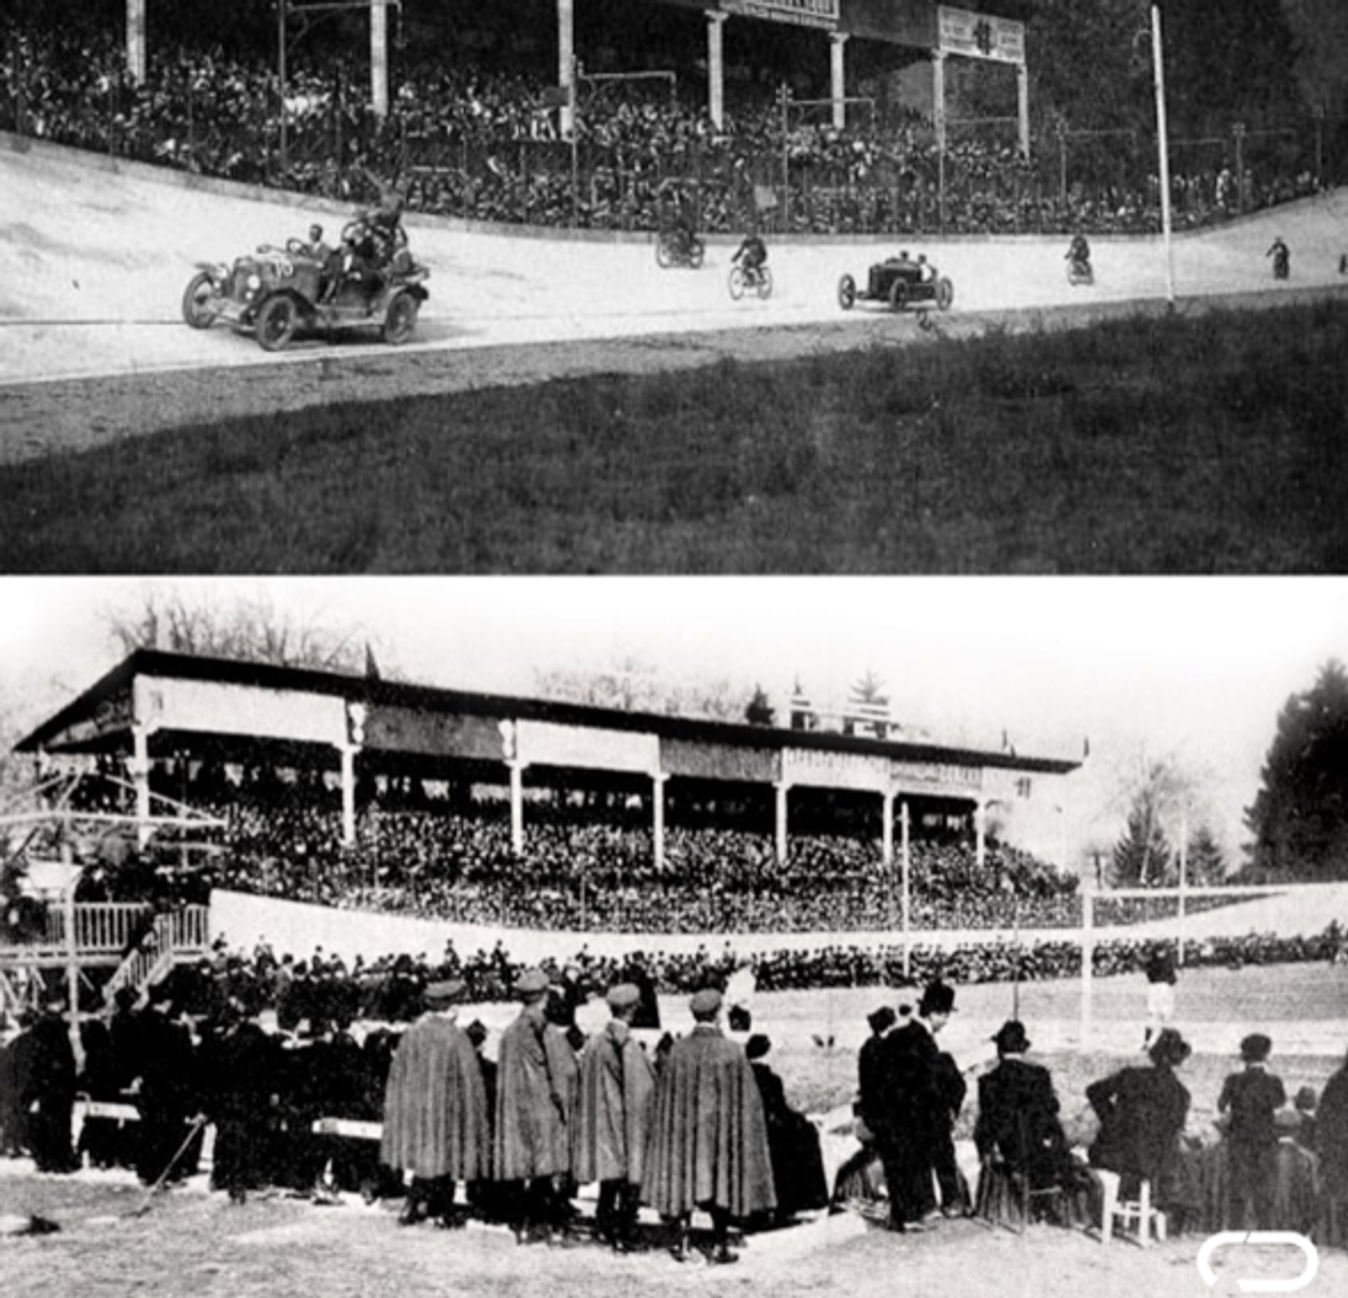 The very earliest days of the Motovelodromo